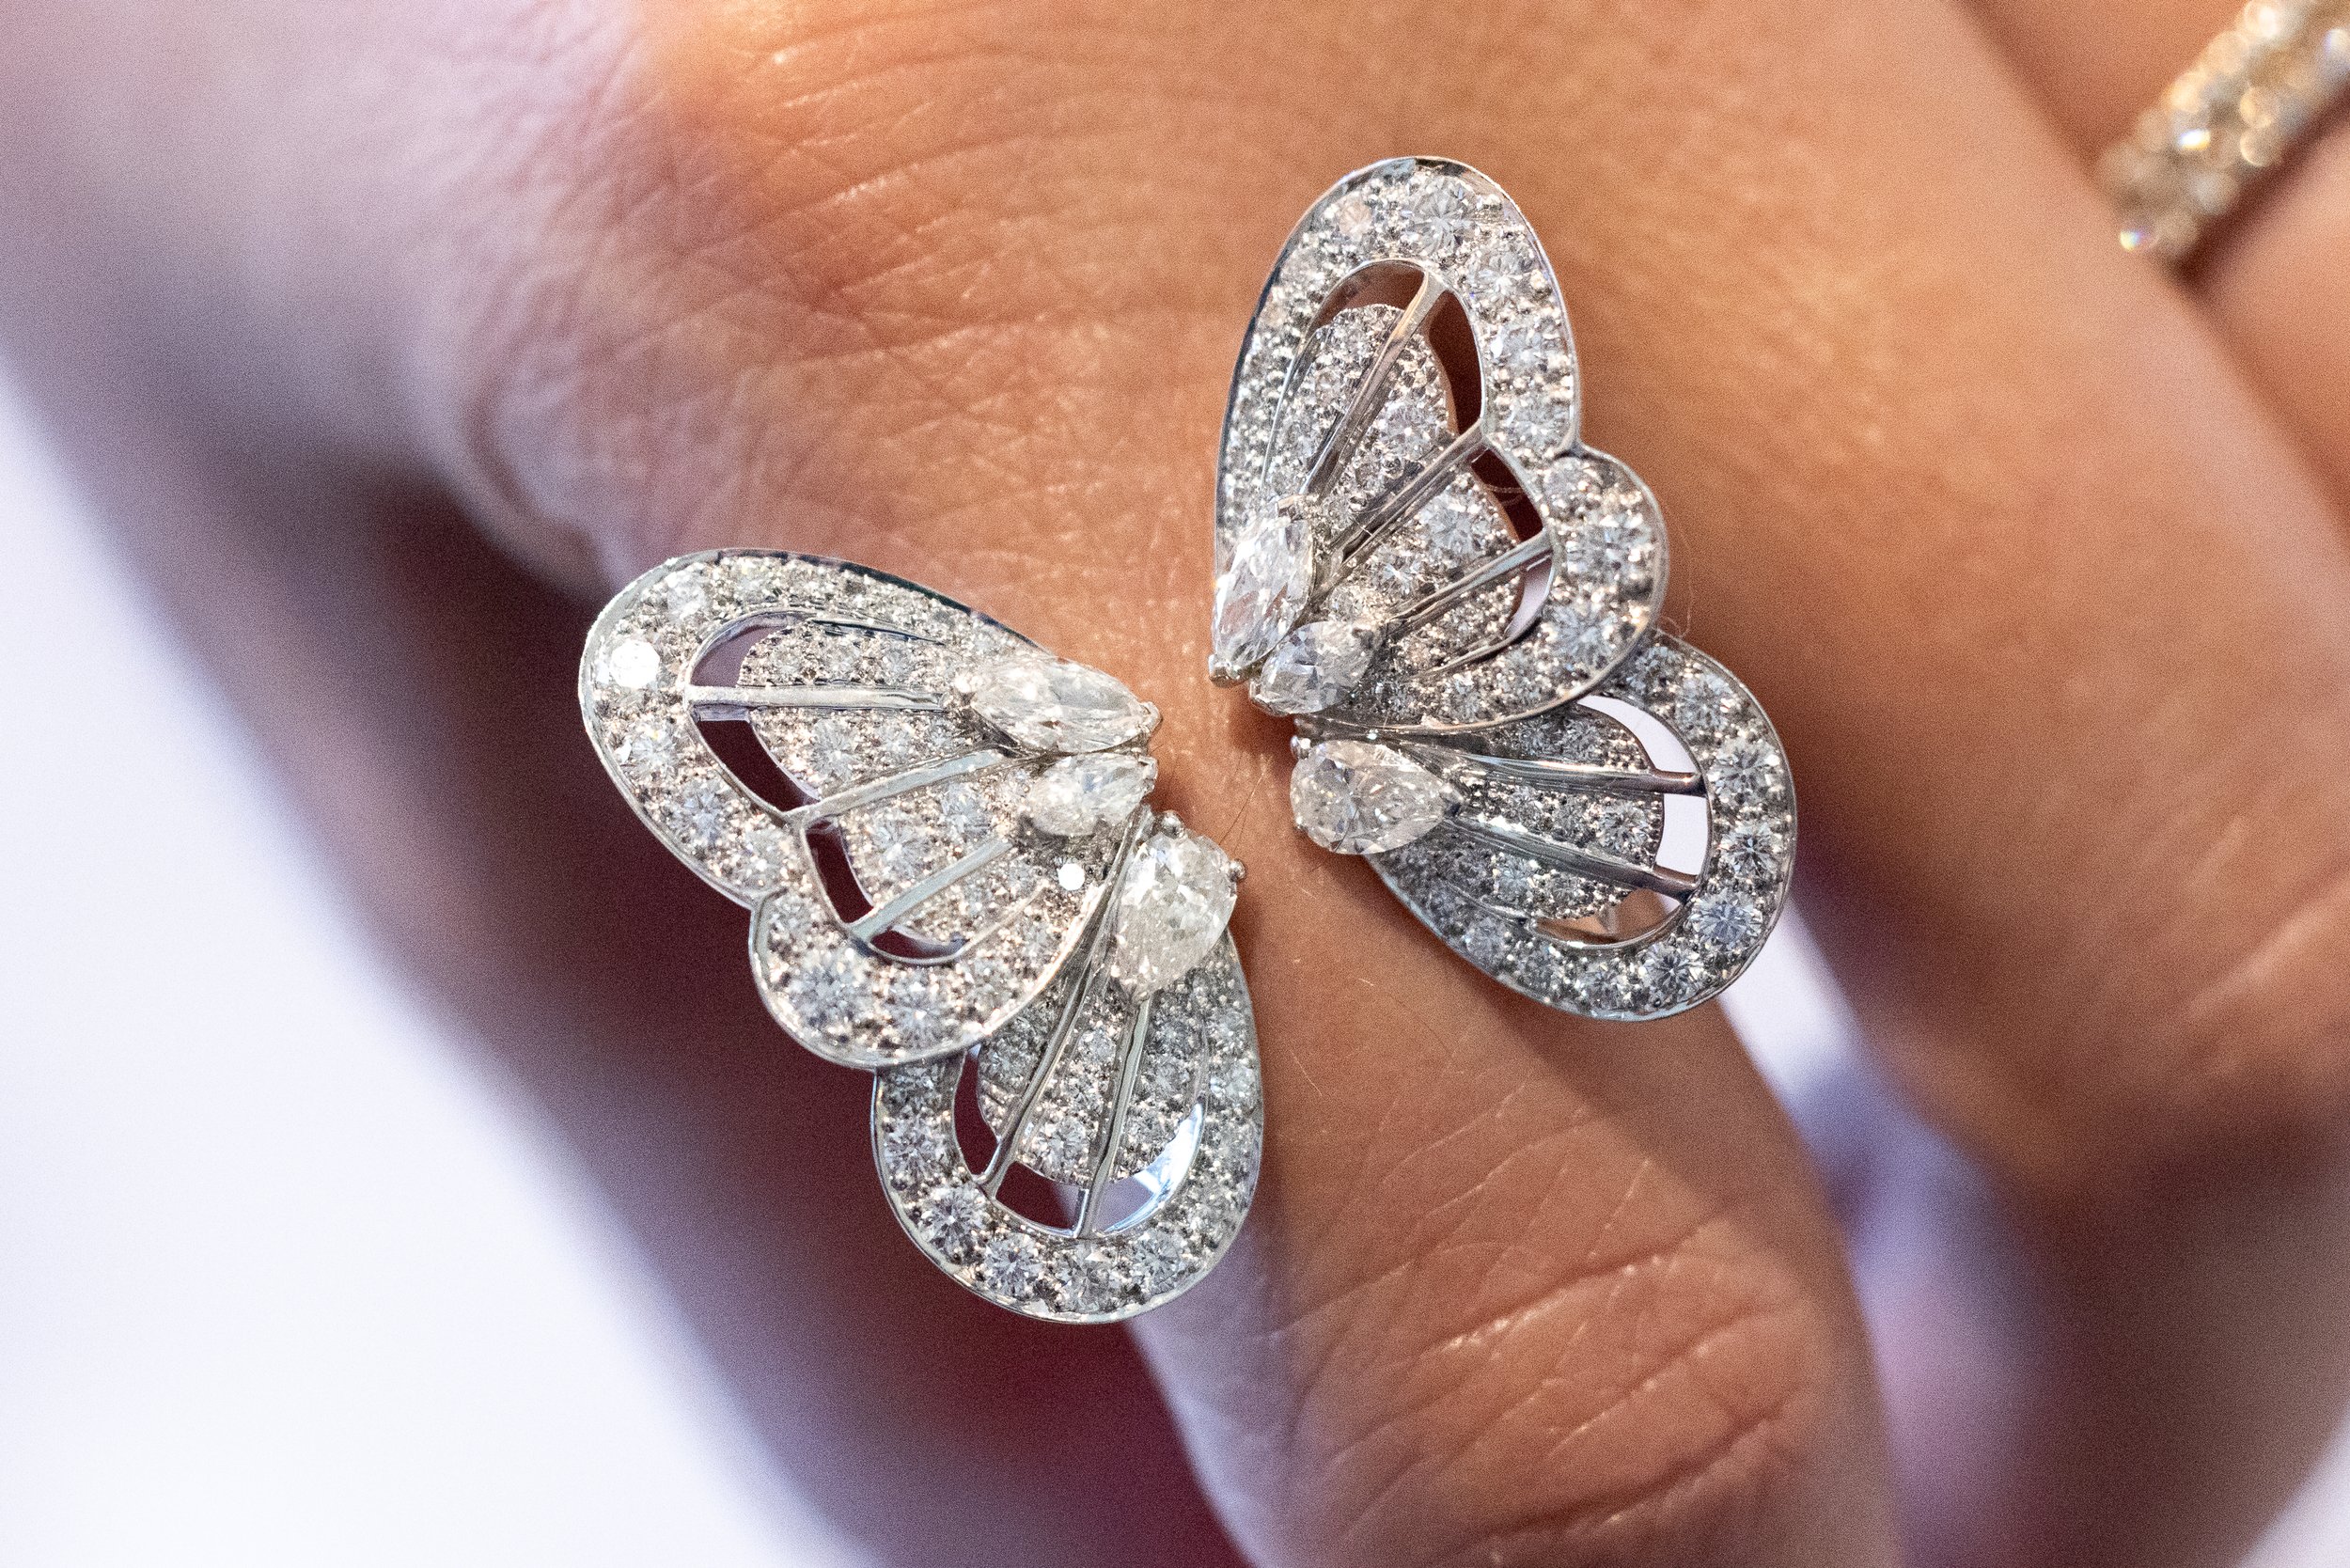 Monarch butterfly white diamond ring, $40,000 at DeBeers